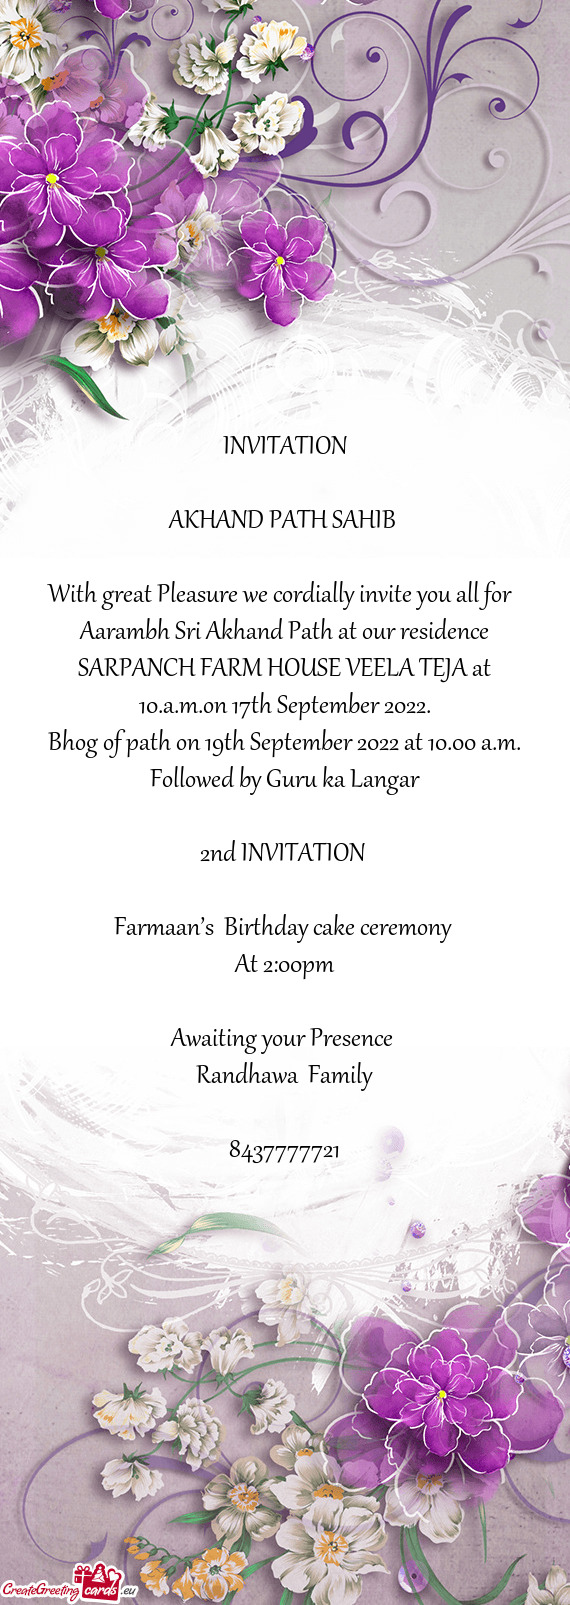 Aarambh Sri Akhand Path at our residence SARPANCH FARM HOUSE VEELA TEJA at 10.a.m.on 17th September